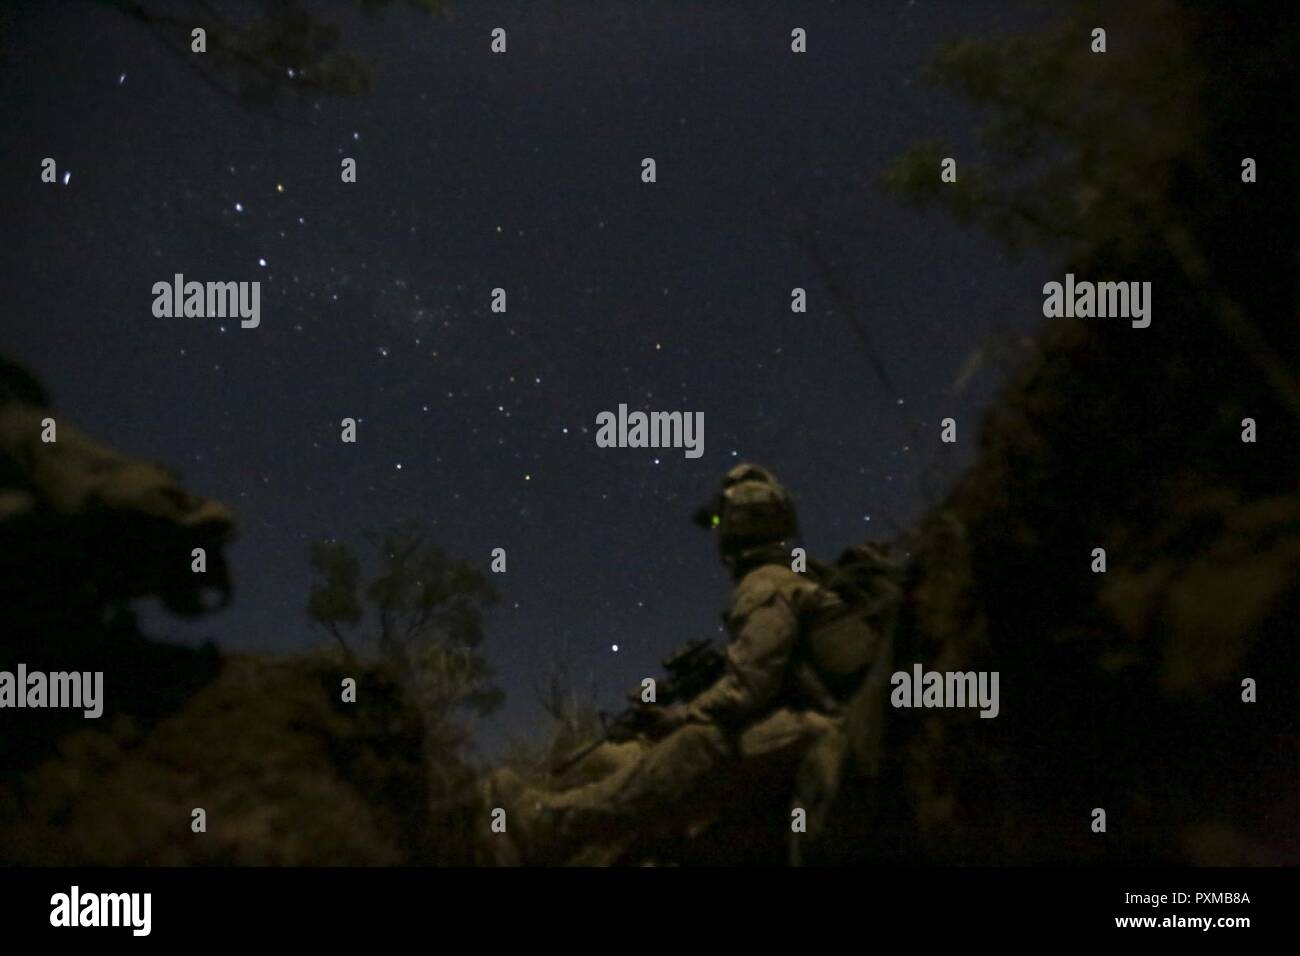 NORTHERN TERRITORY, Australia – Lance Cpl. Andrew Naranjo, rifleman,  Company L, 3rd Battalion, 4th Marine Regiment, 1st Marine Division, Marine  Rotational Force Darwin, looks up at the sky after setting up his